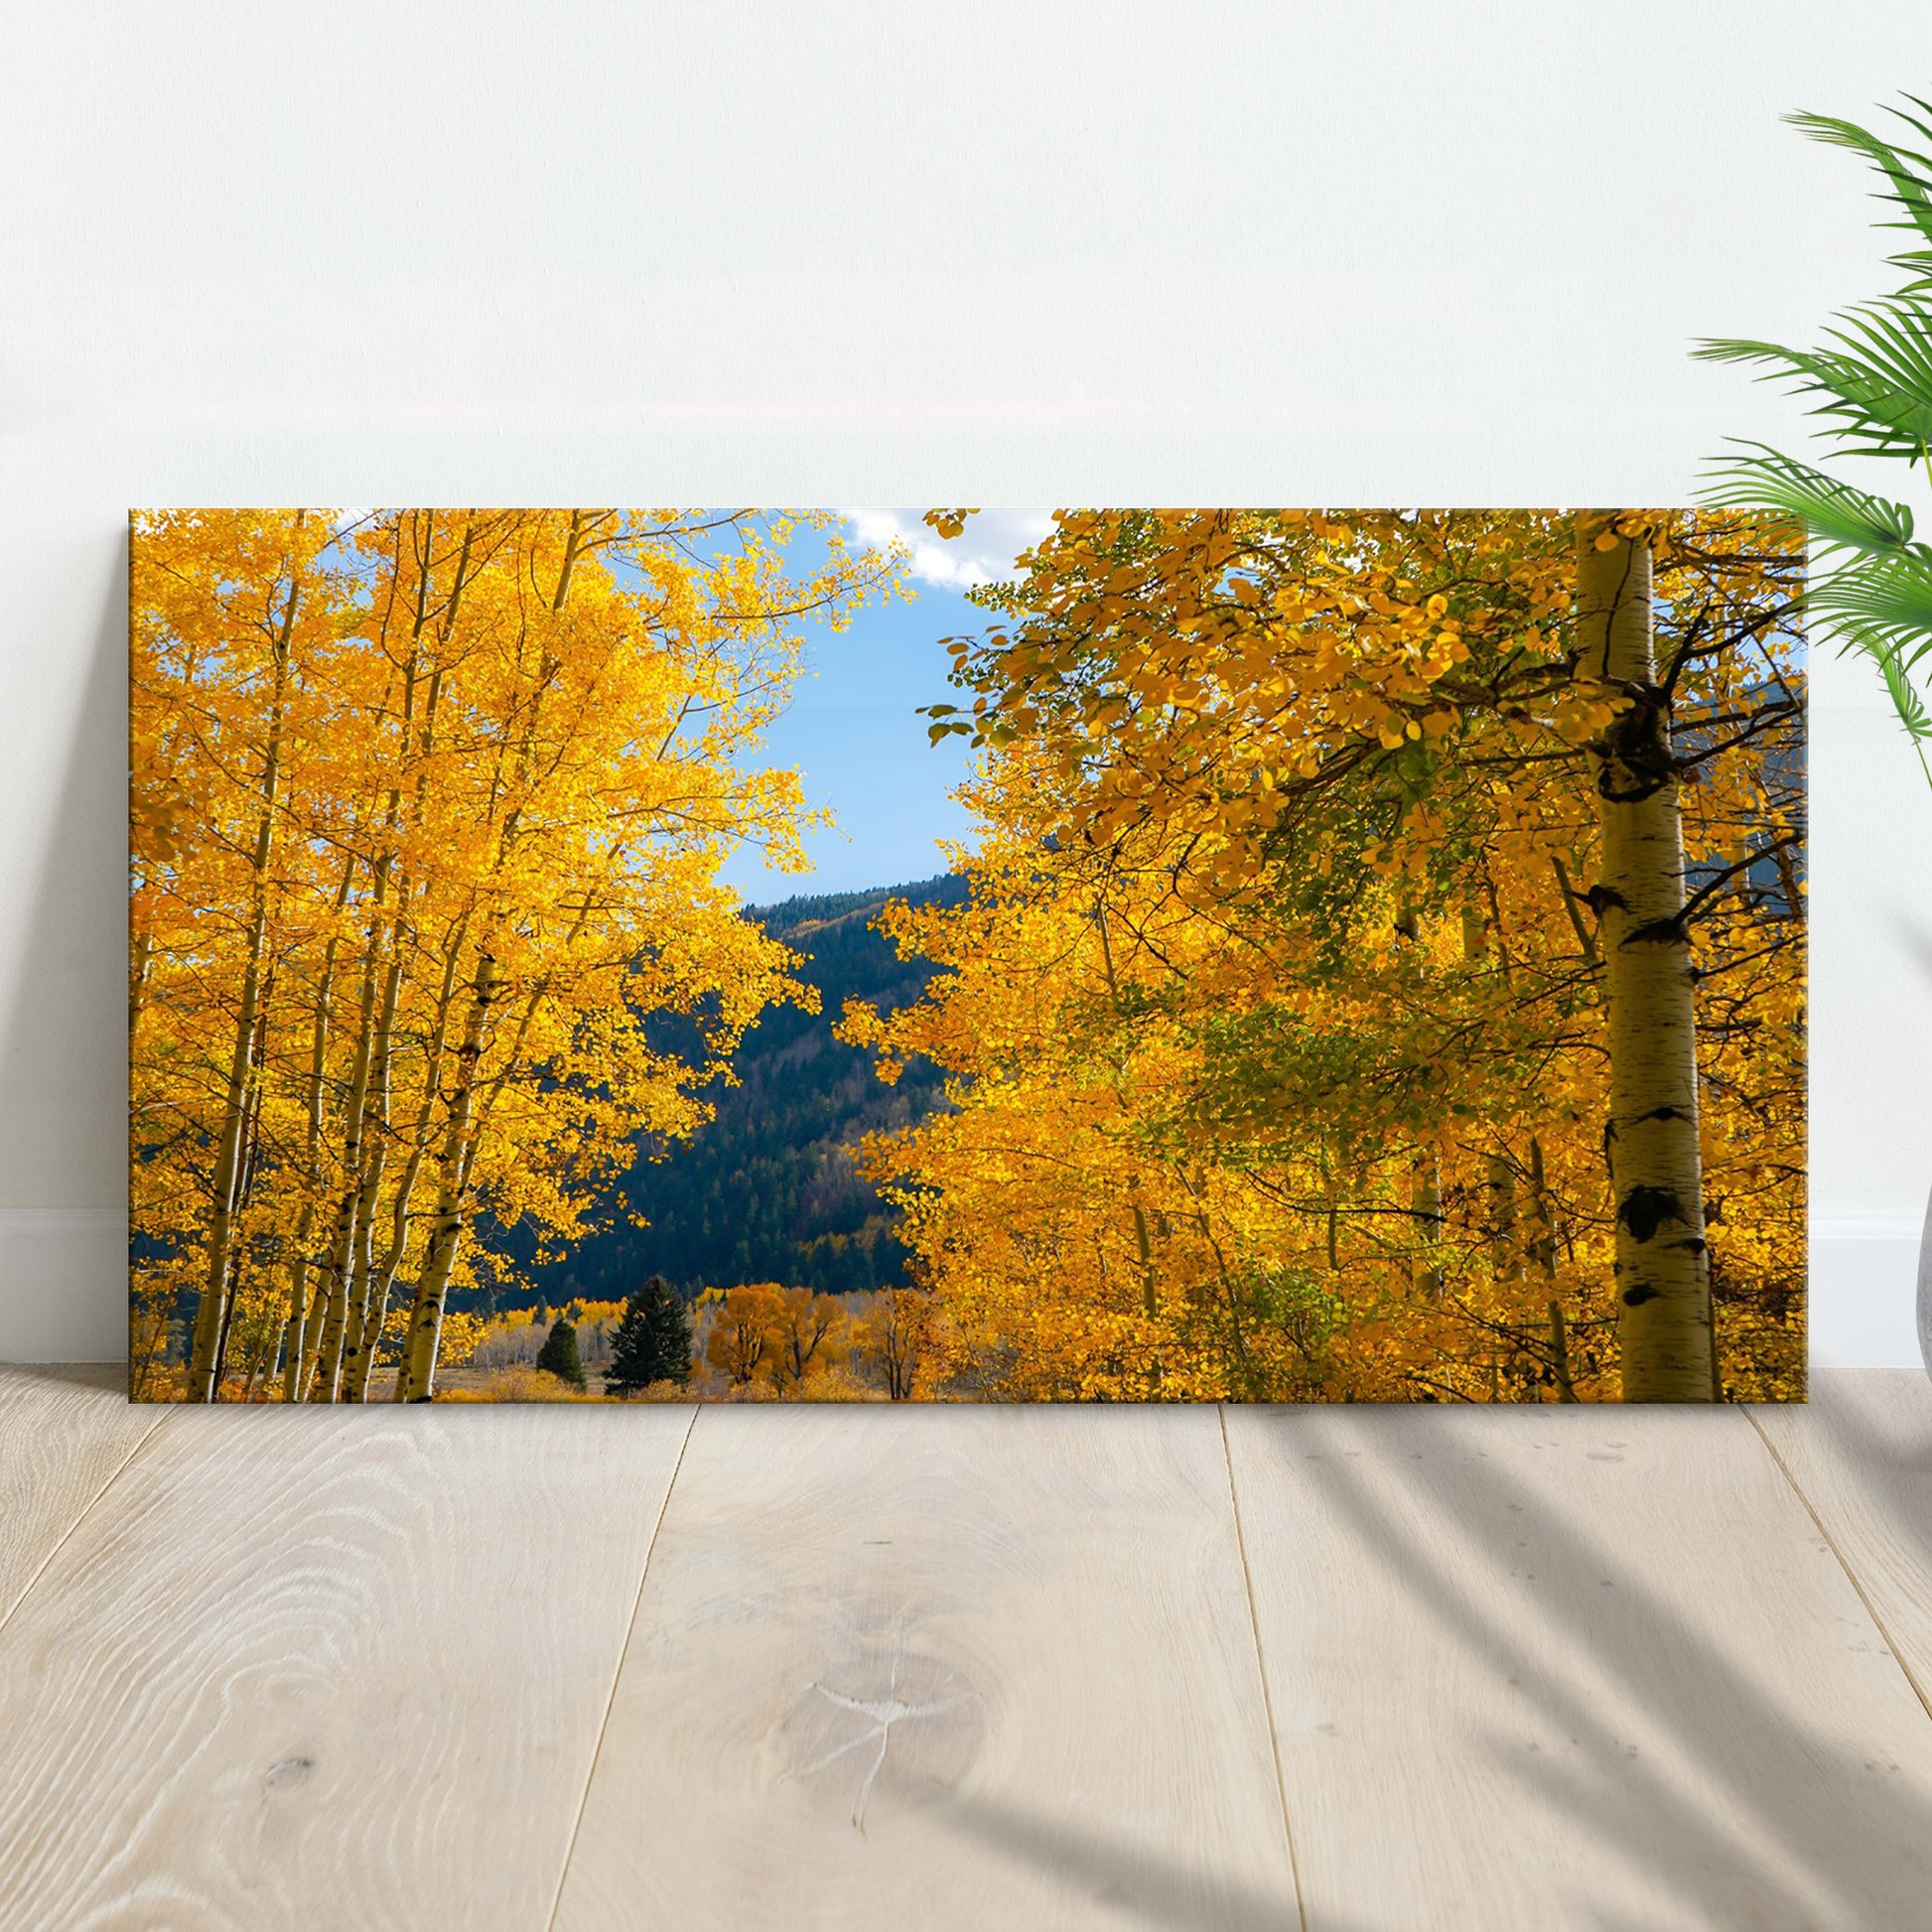 Colorado Aspen Forest Canvas Wall Art - Image by Tailored Canvases